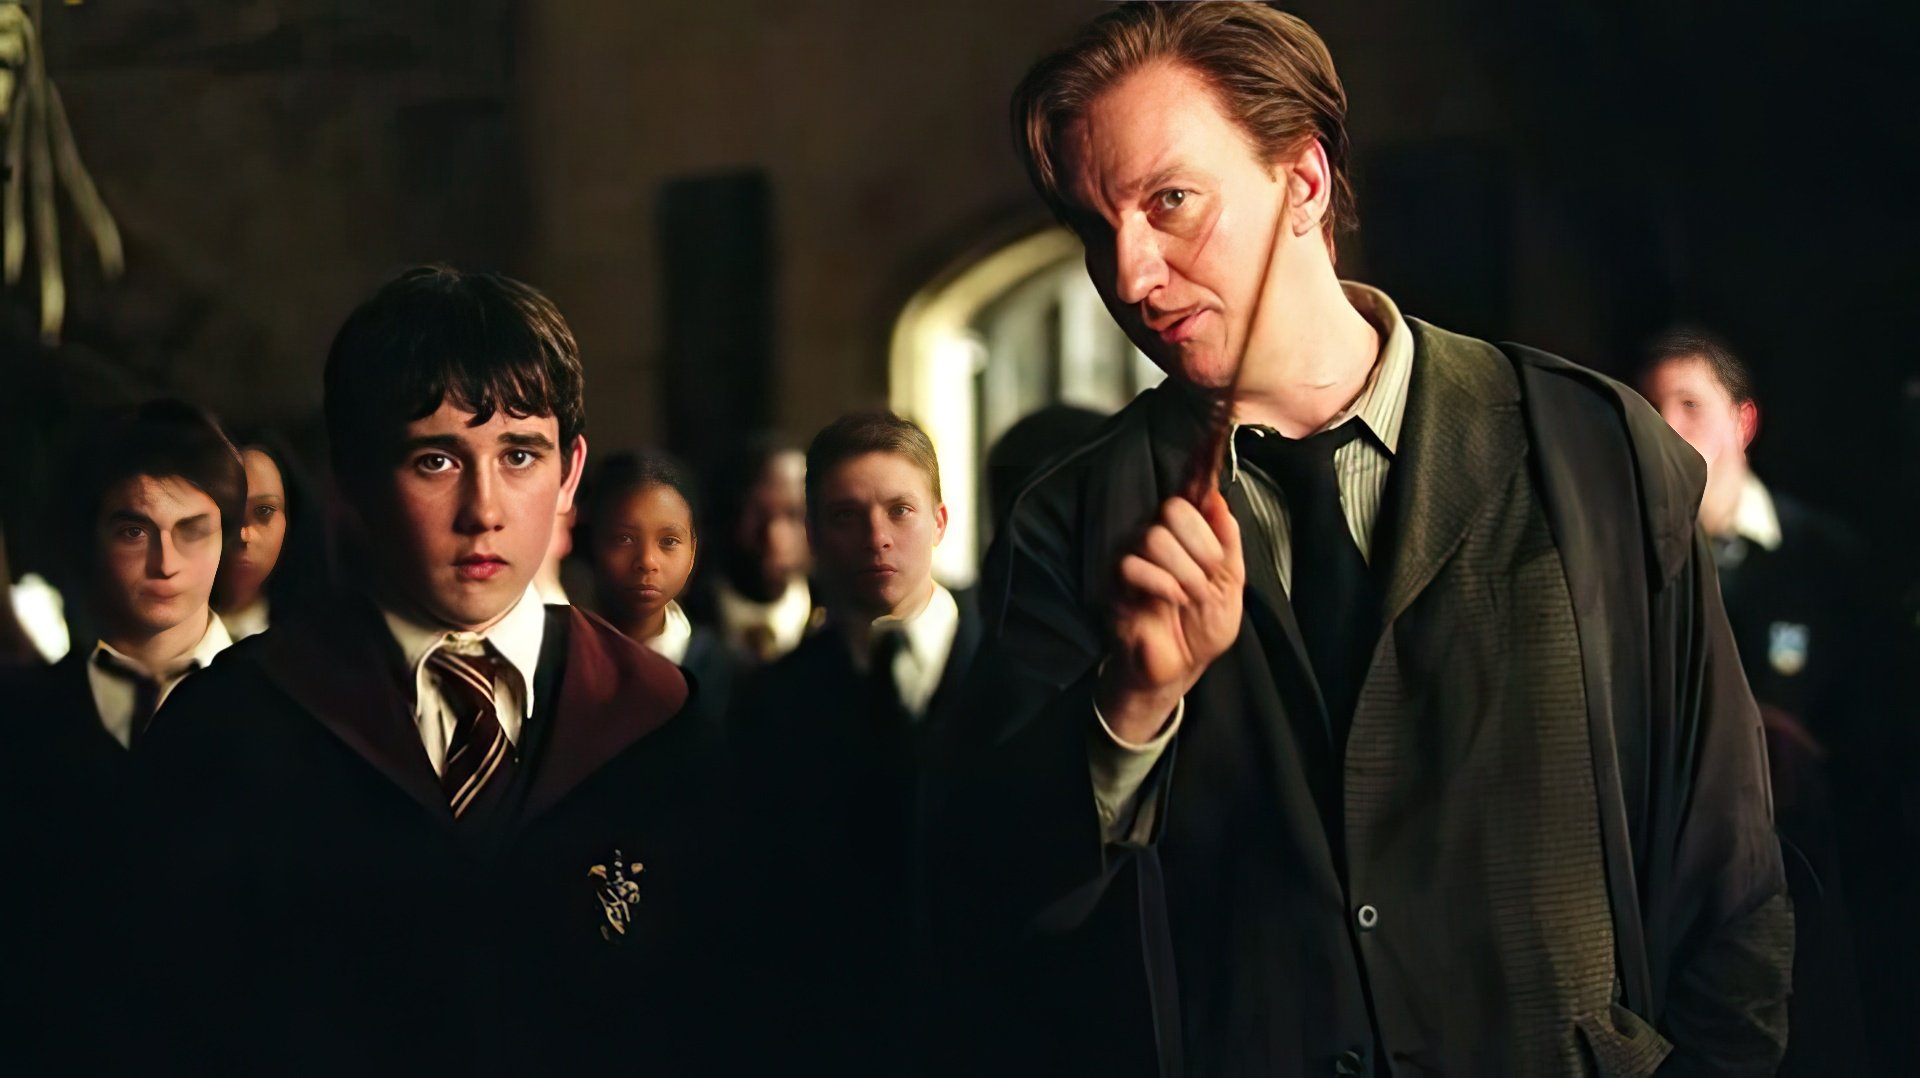 The role in 'Harry Potter' brought David global fame